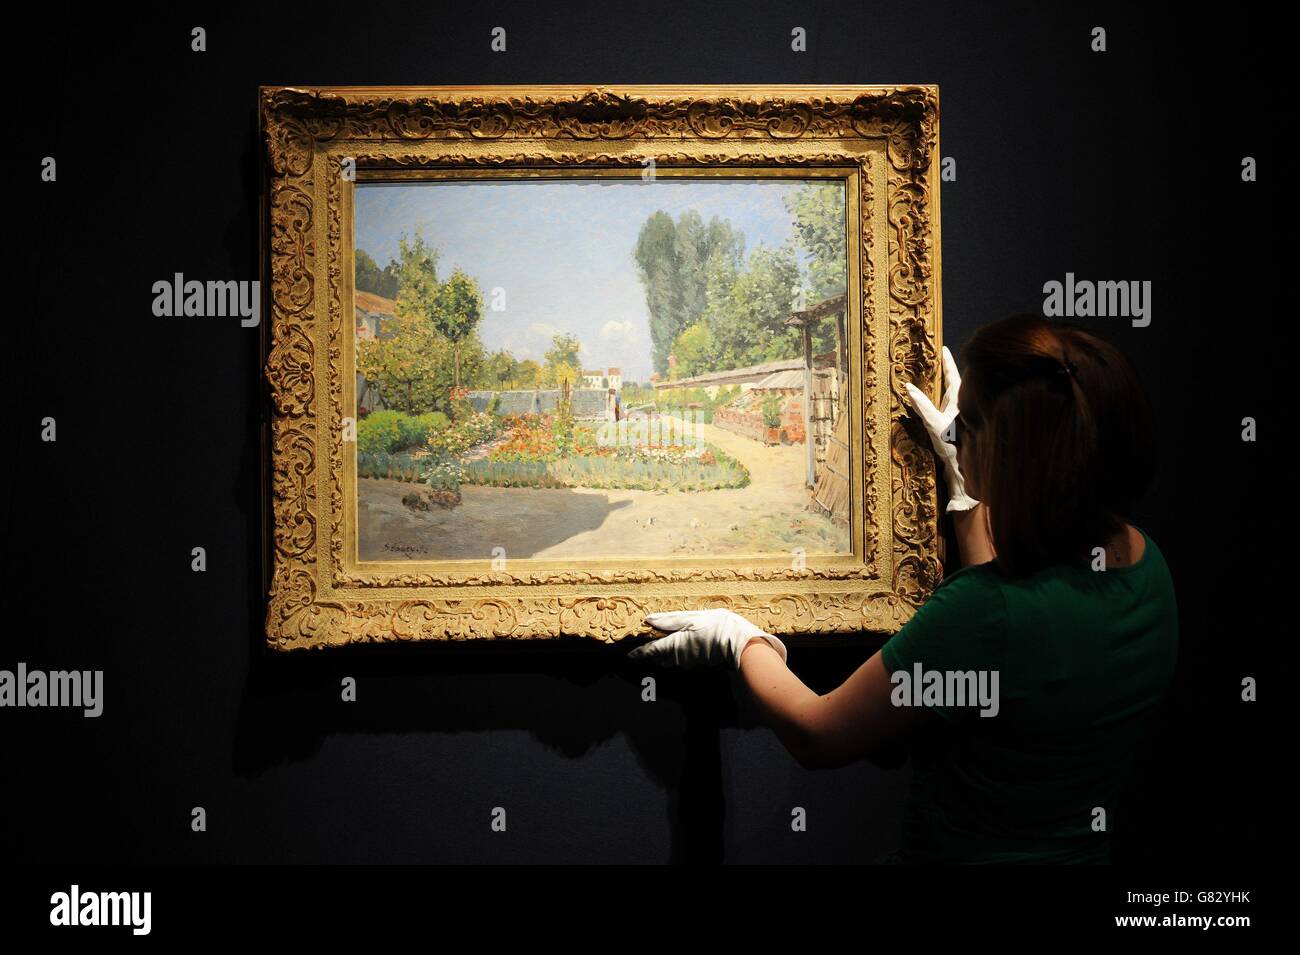 A Christie's employee looks at 'Le Potager', a painting by Alfred Sisley estimated between £1.5 million and £2 million, during a photo call for their Impressionist & Modern Art Evening Sale which is due to take place on 23rd June in London. Stock Photo